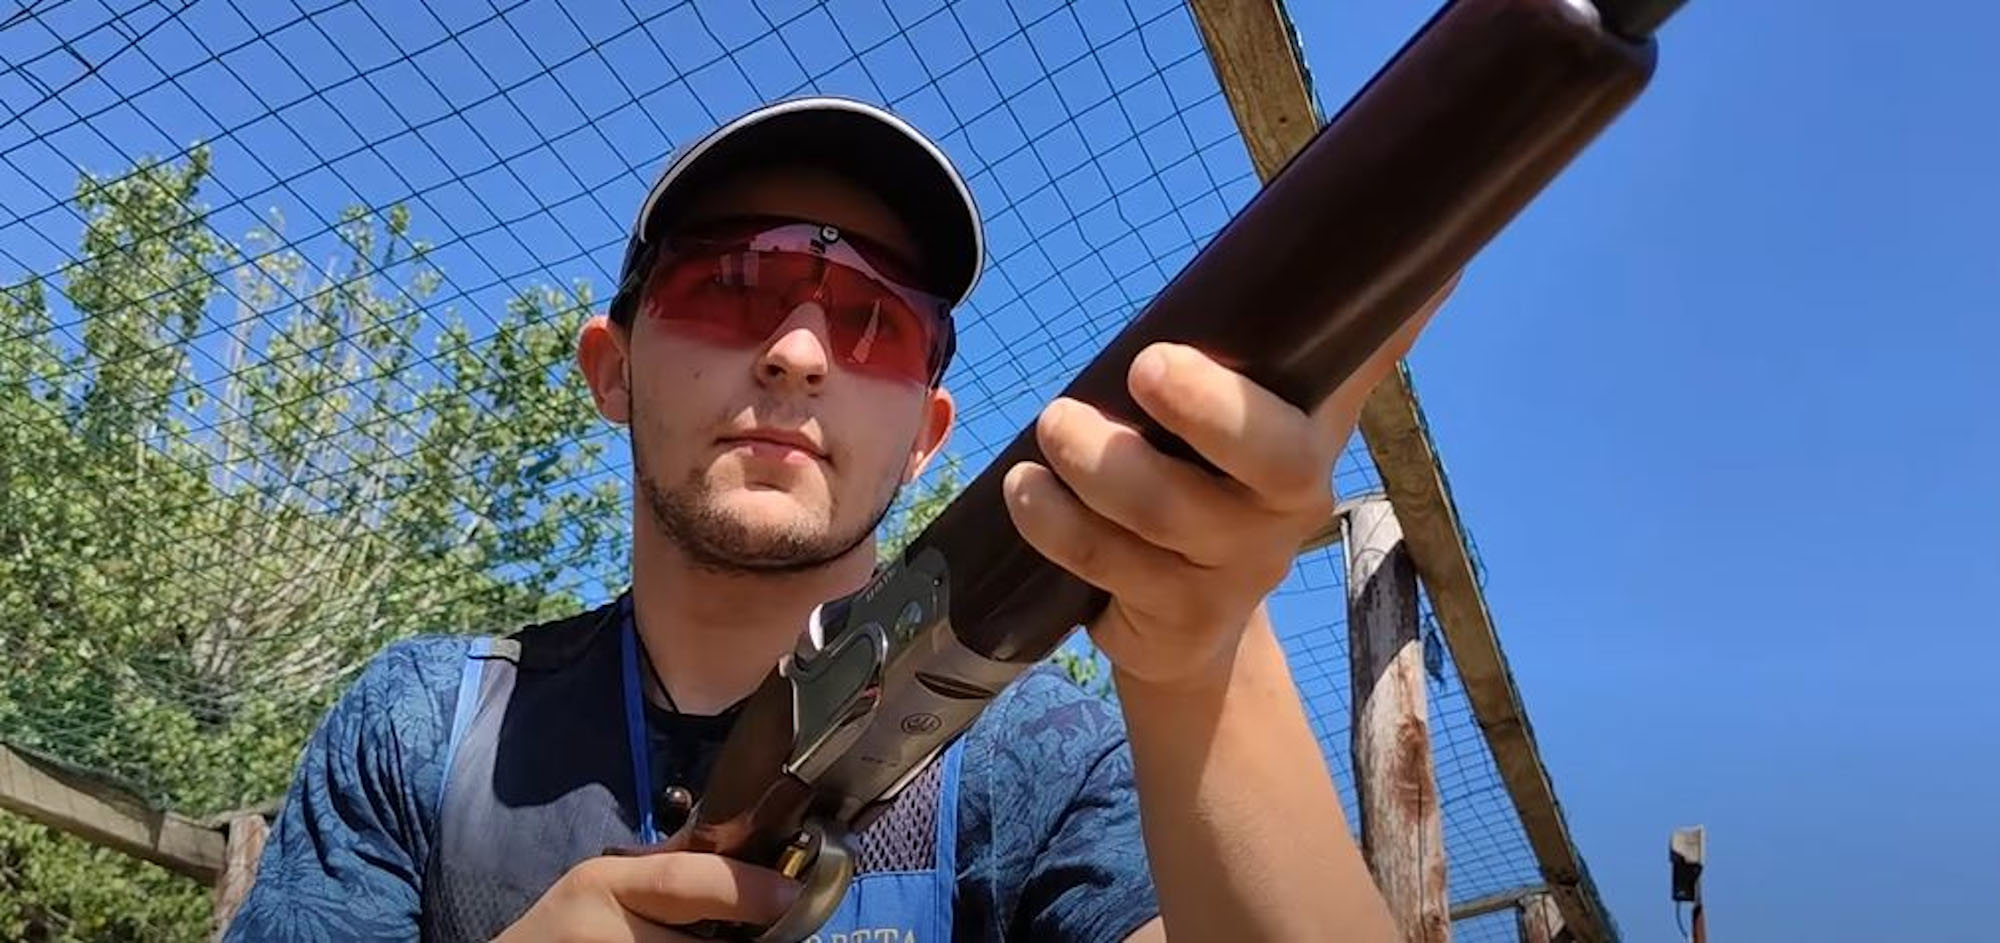 Read more about the article World Champion Shooter, 19, Dies In Hunting Accident In Italy